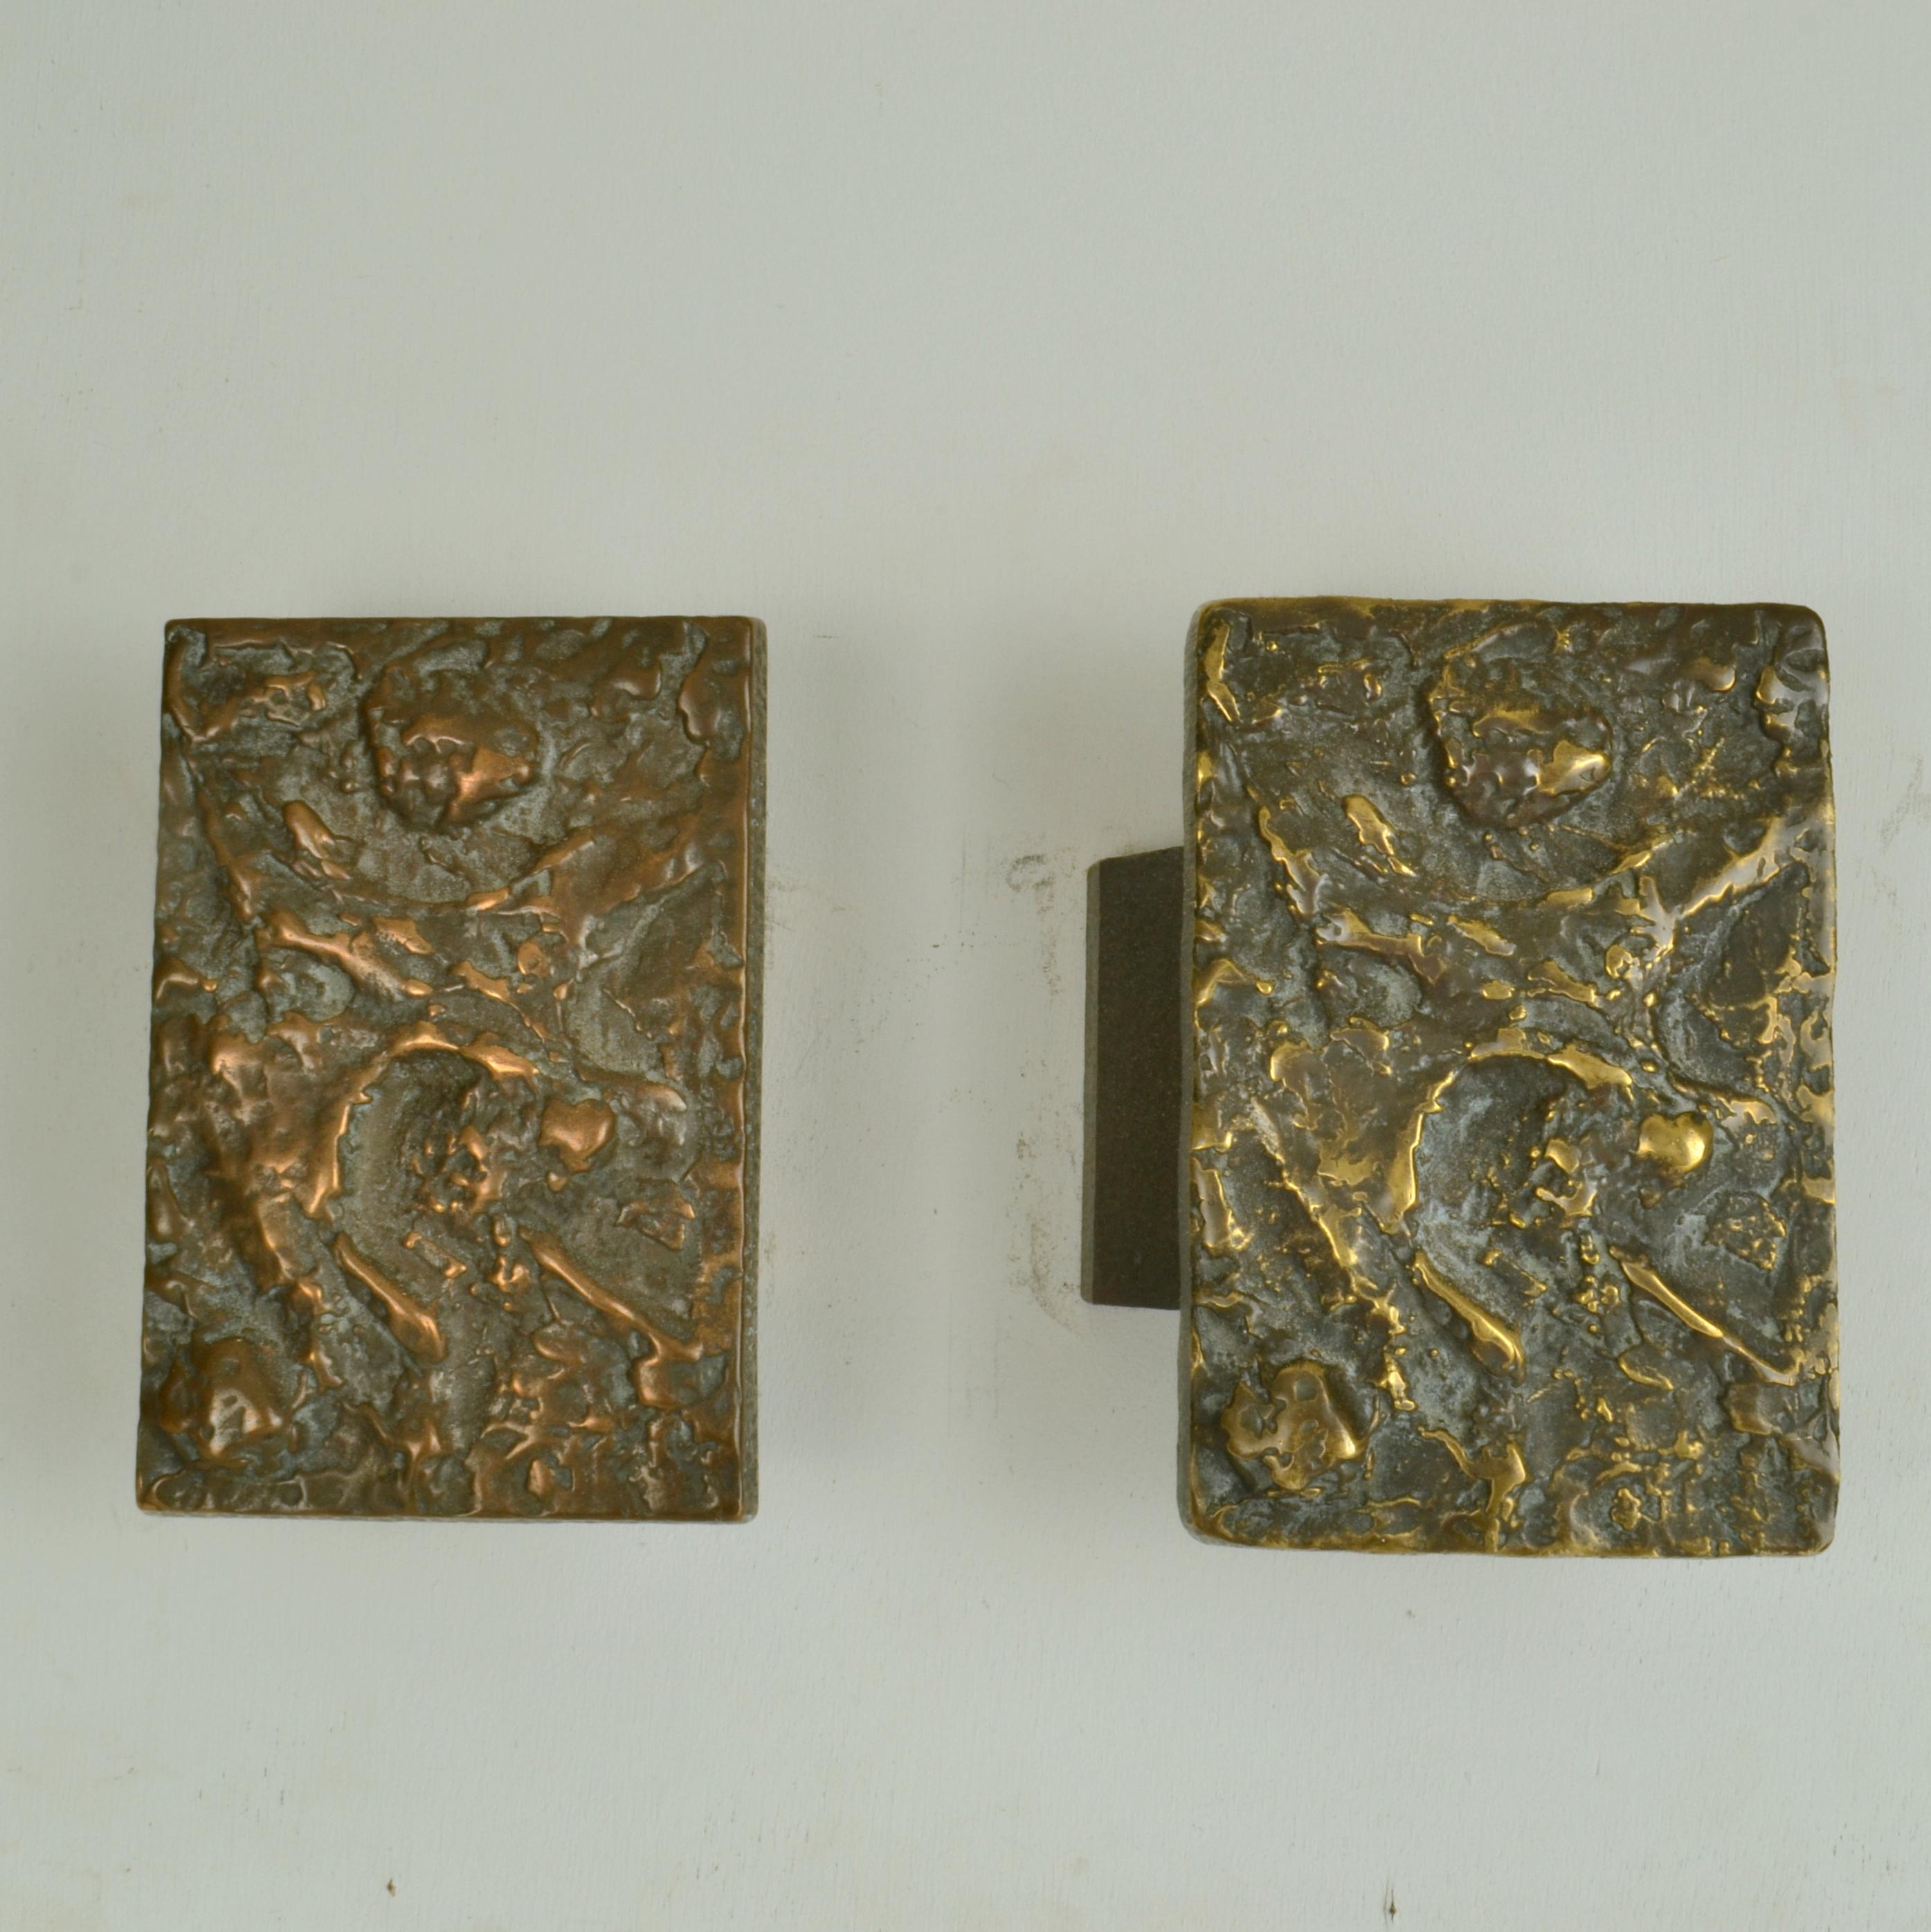 Set of two rectangular bronze door handles with abstract Brutalist relief and irregular textures, European 1970s. Their relief with original patina is expressive and will give real personality to a house.
These identical handles can be applied